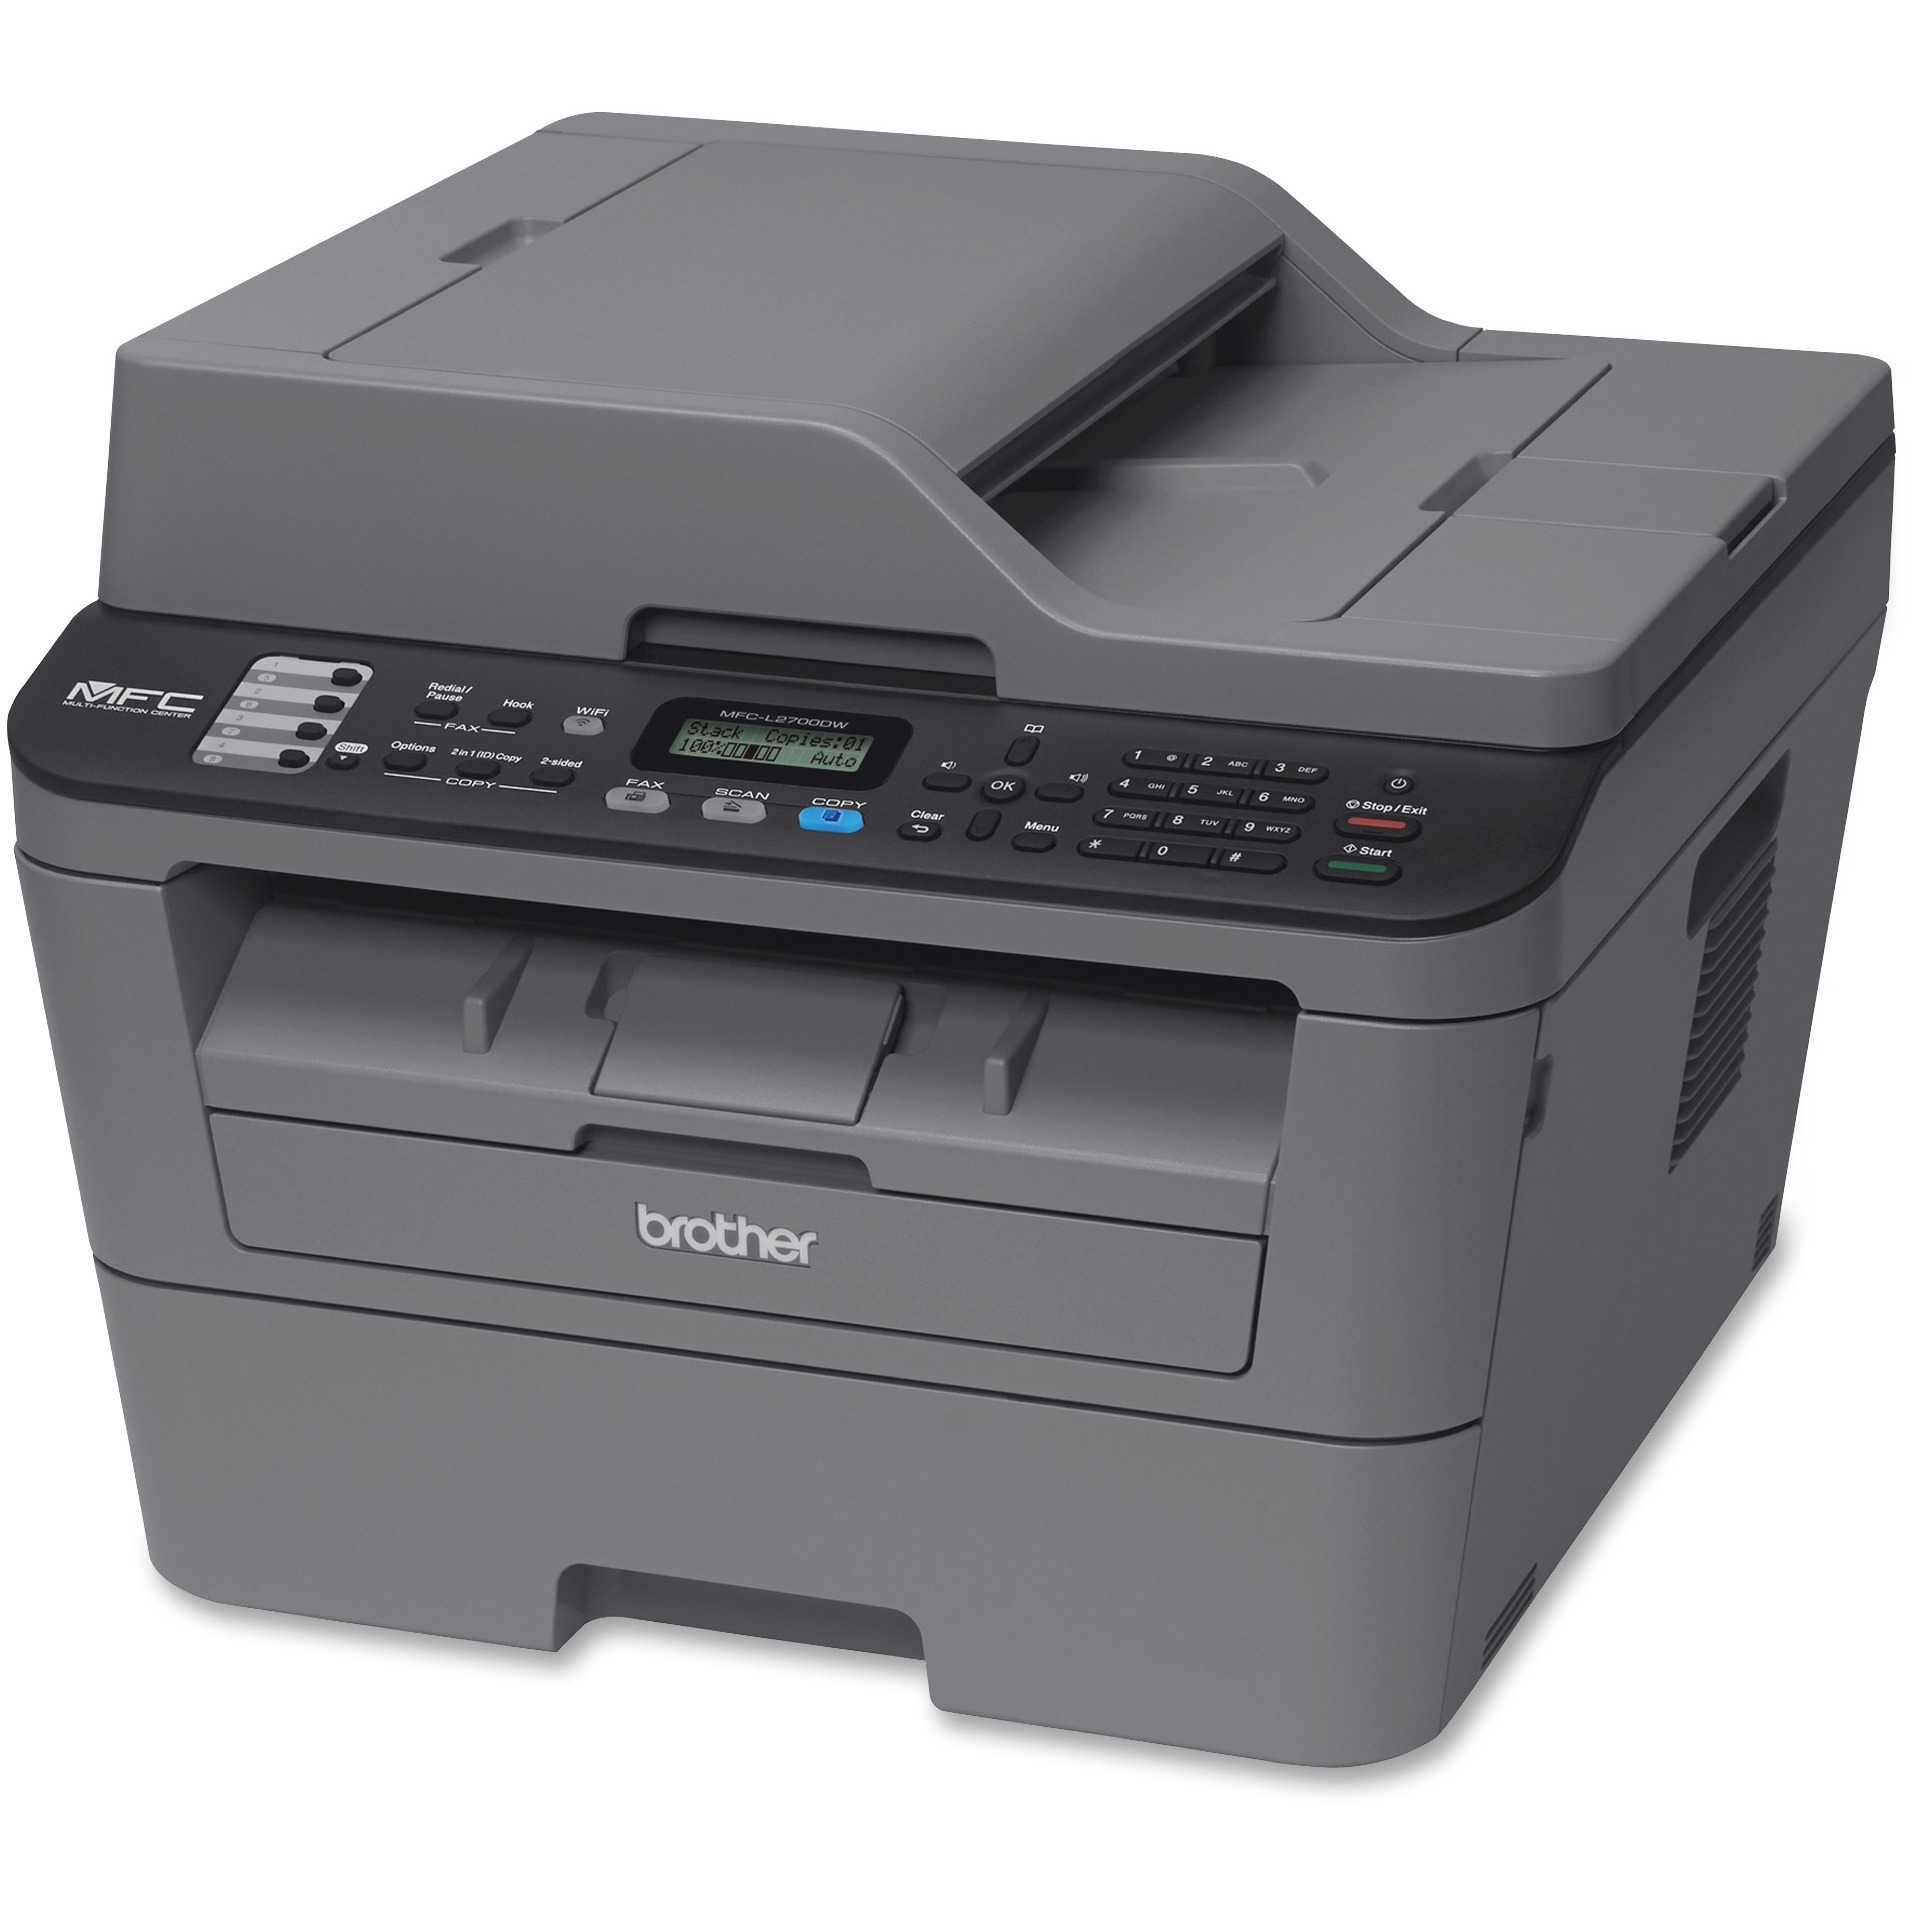 Brother MFC-L2700DW Compact Wireless Laser All-in-One, Copy/Fax/Print/Scan - image 2 of 3